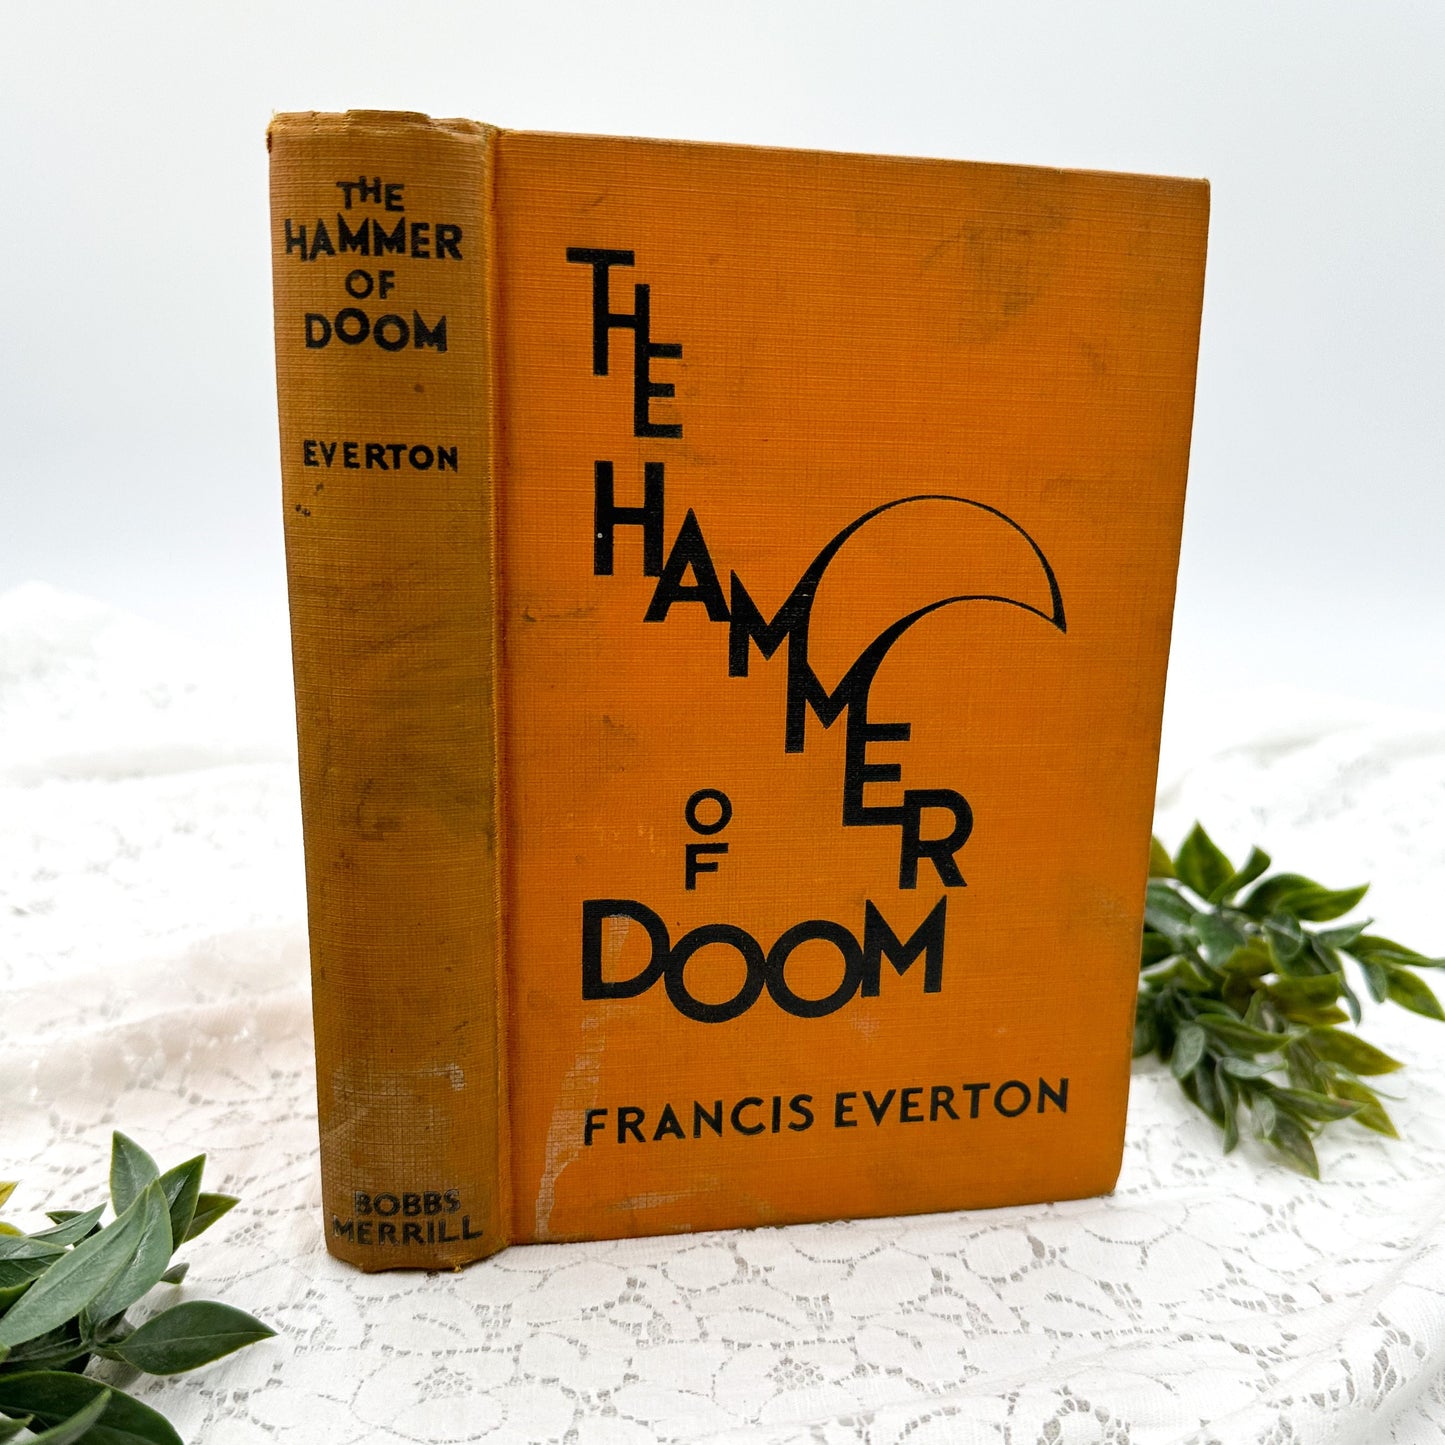 The Hammer of Doom by Francis Everton